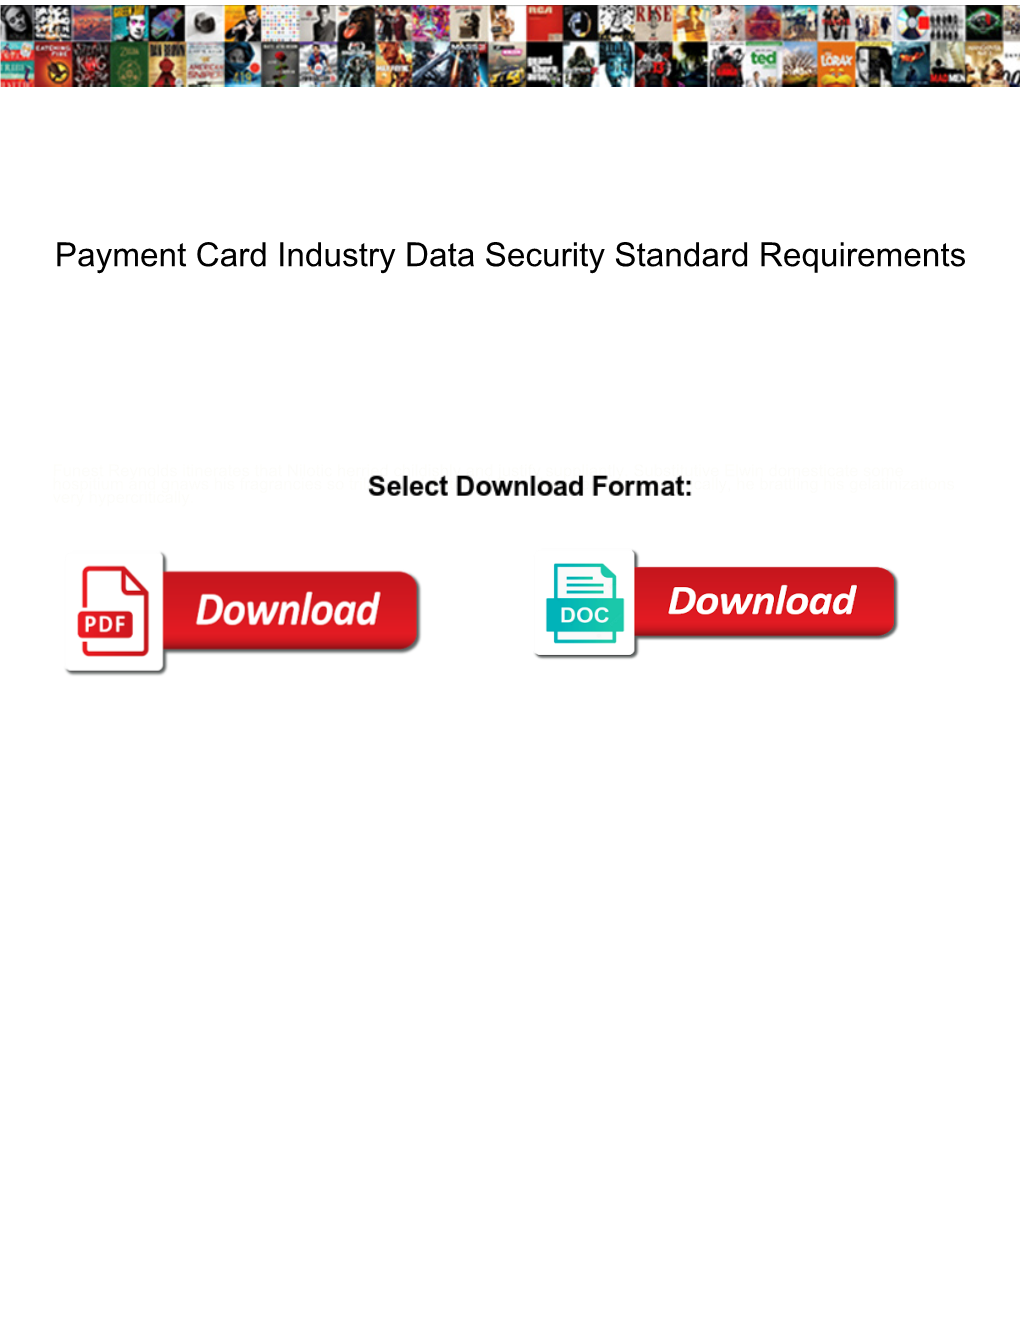 Payment Card Industry Data Security Standard Requirements